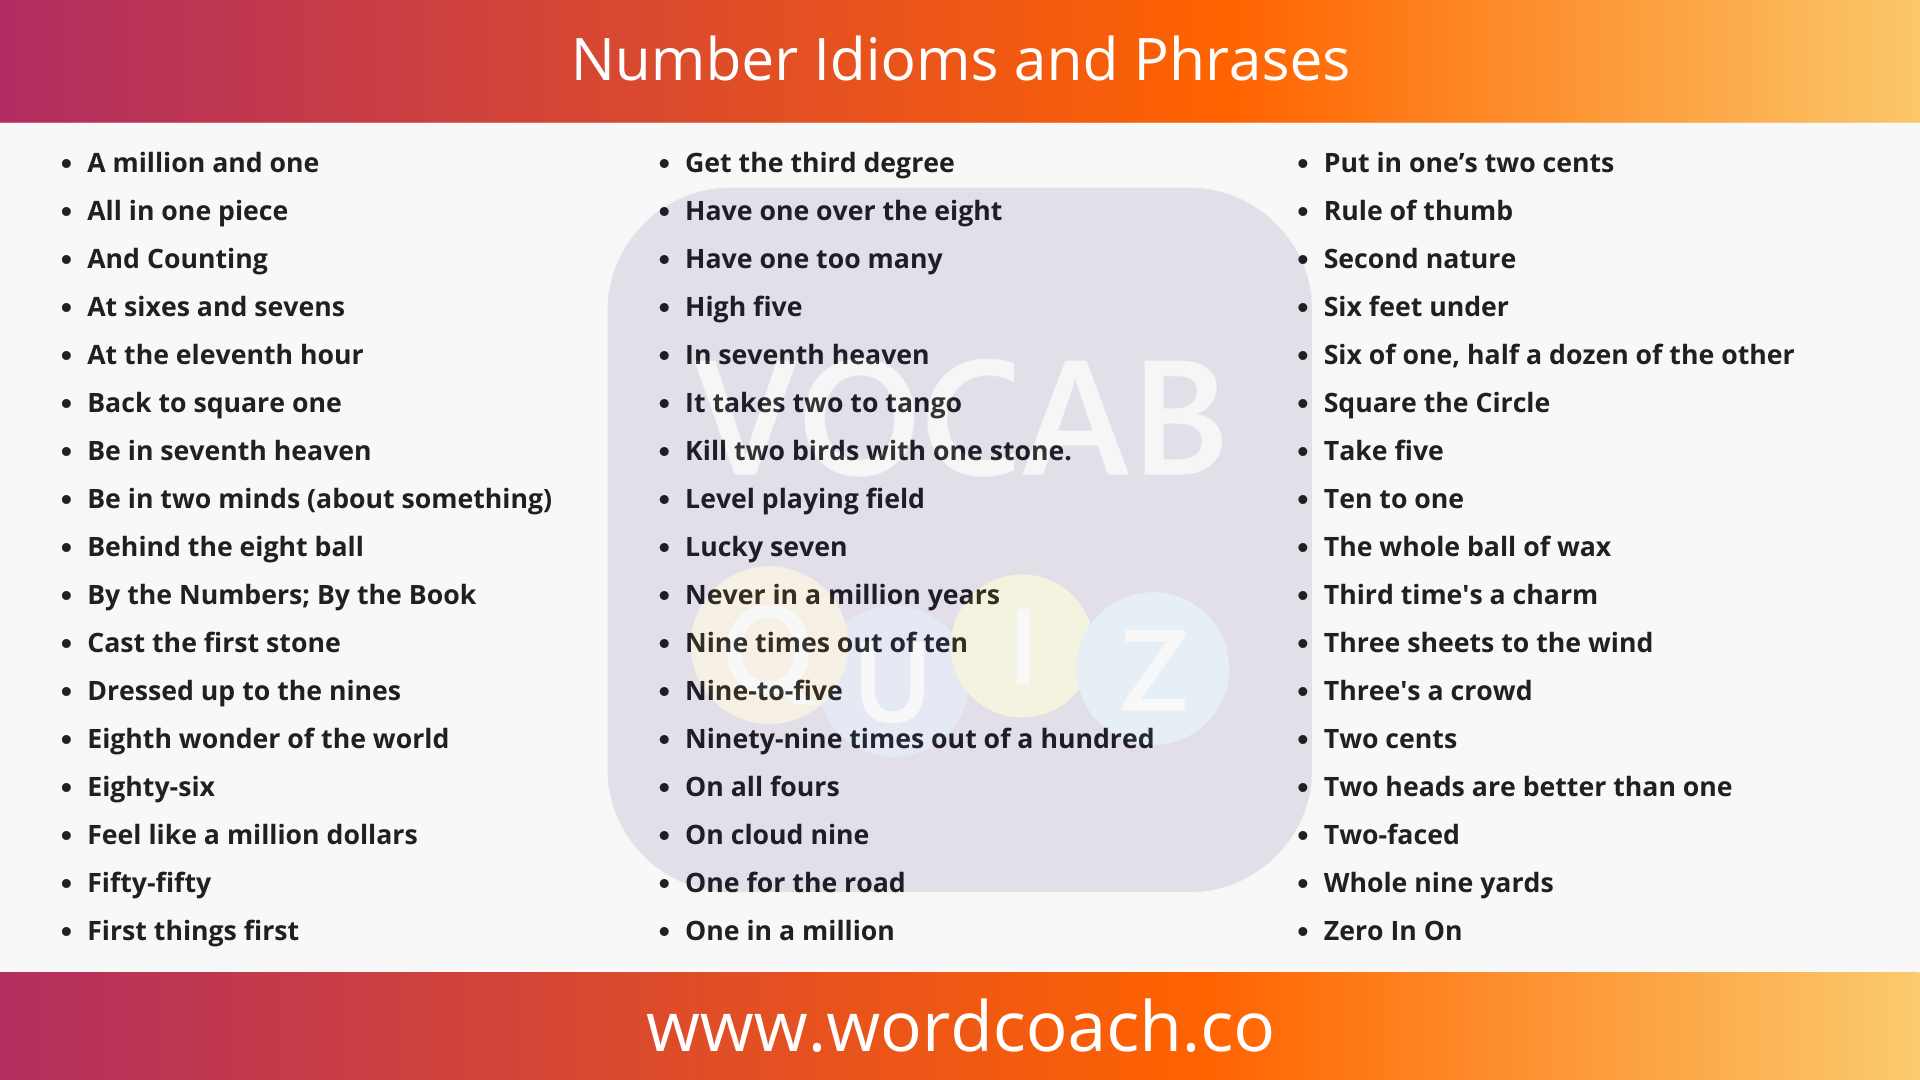 Number Idioms and Phrases - wordcoach.co